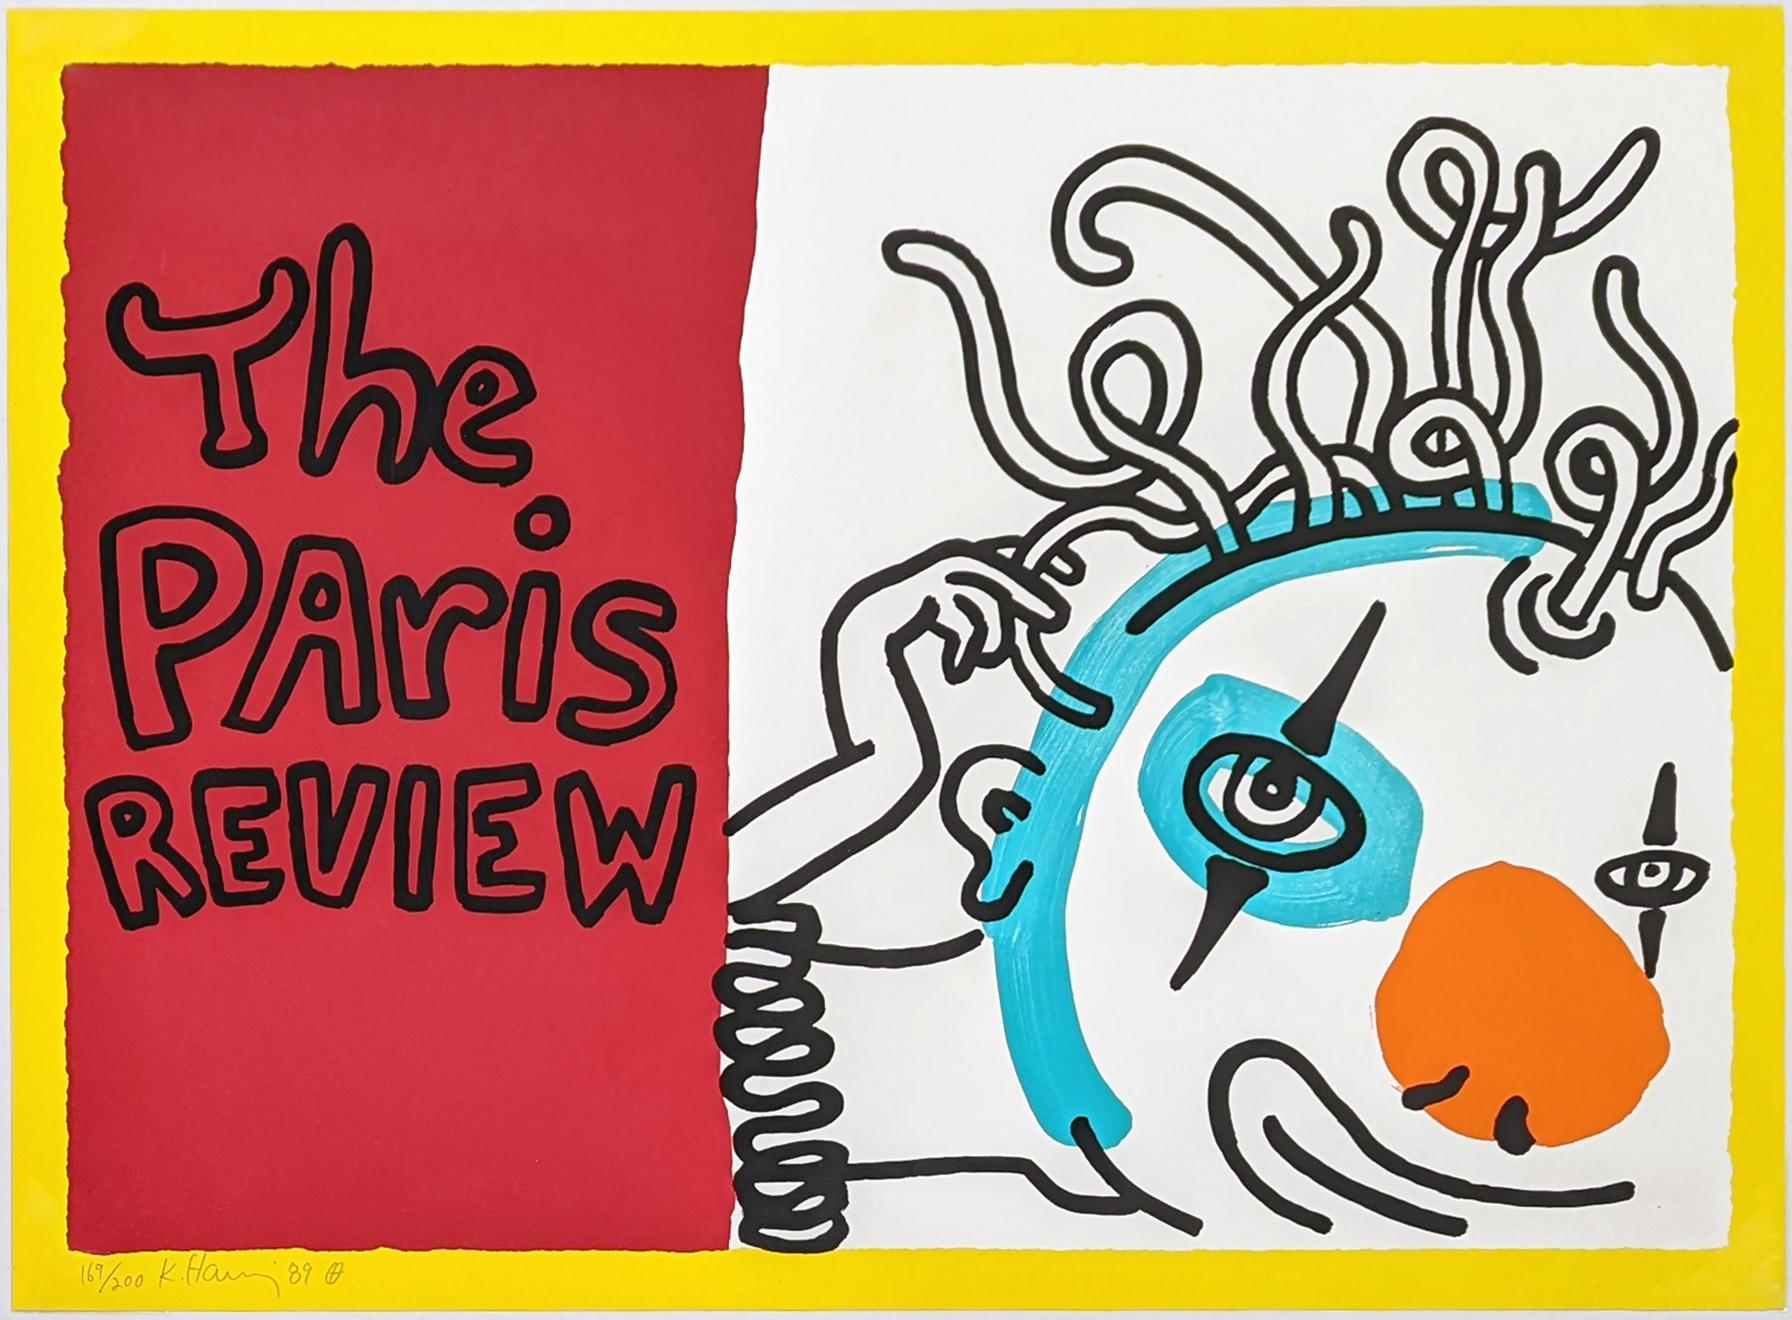 PARIS REVIEW - Print by Keith Haring